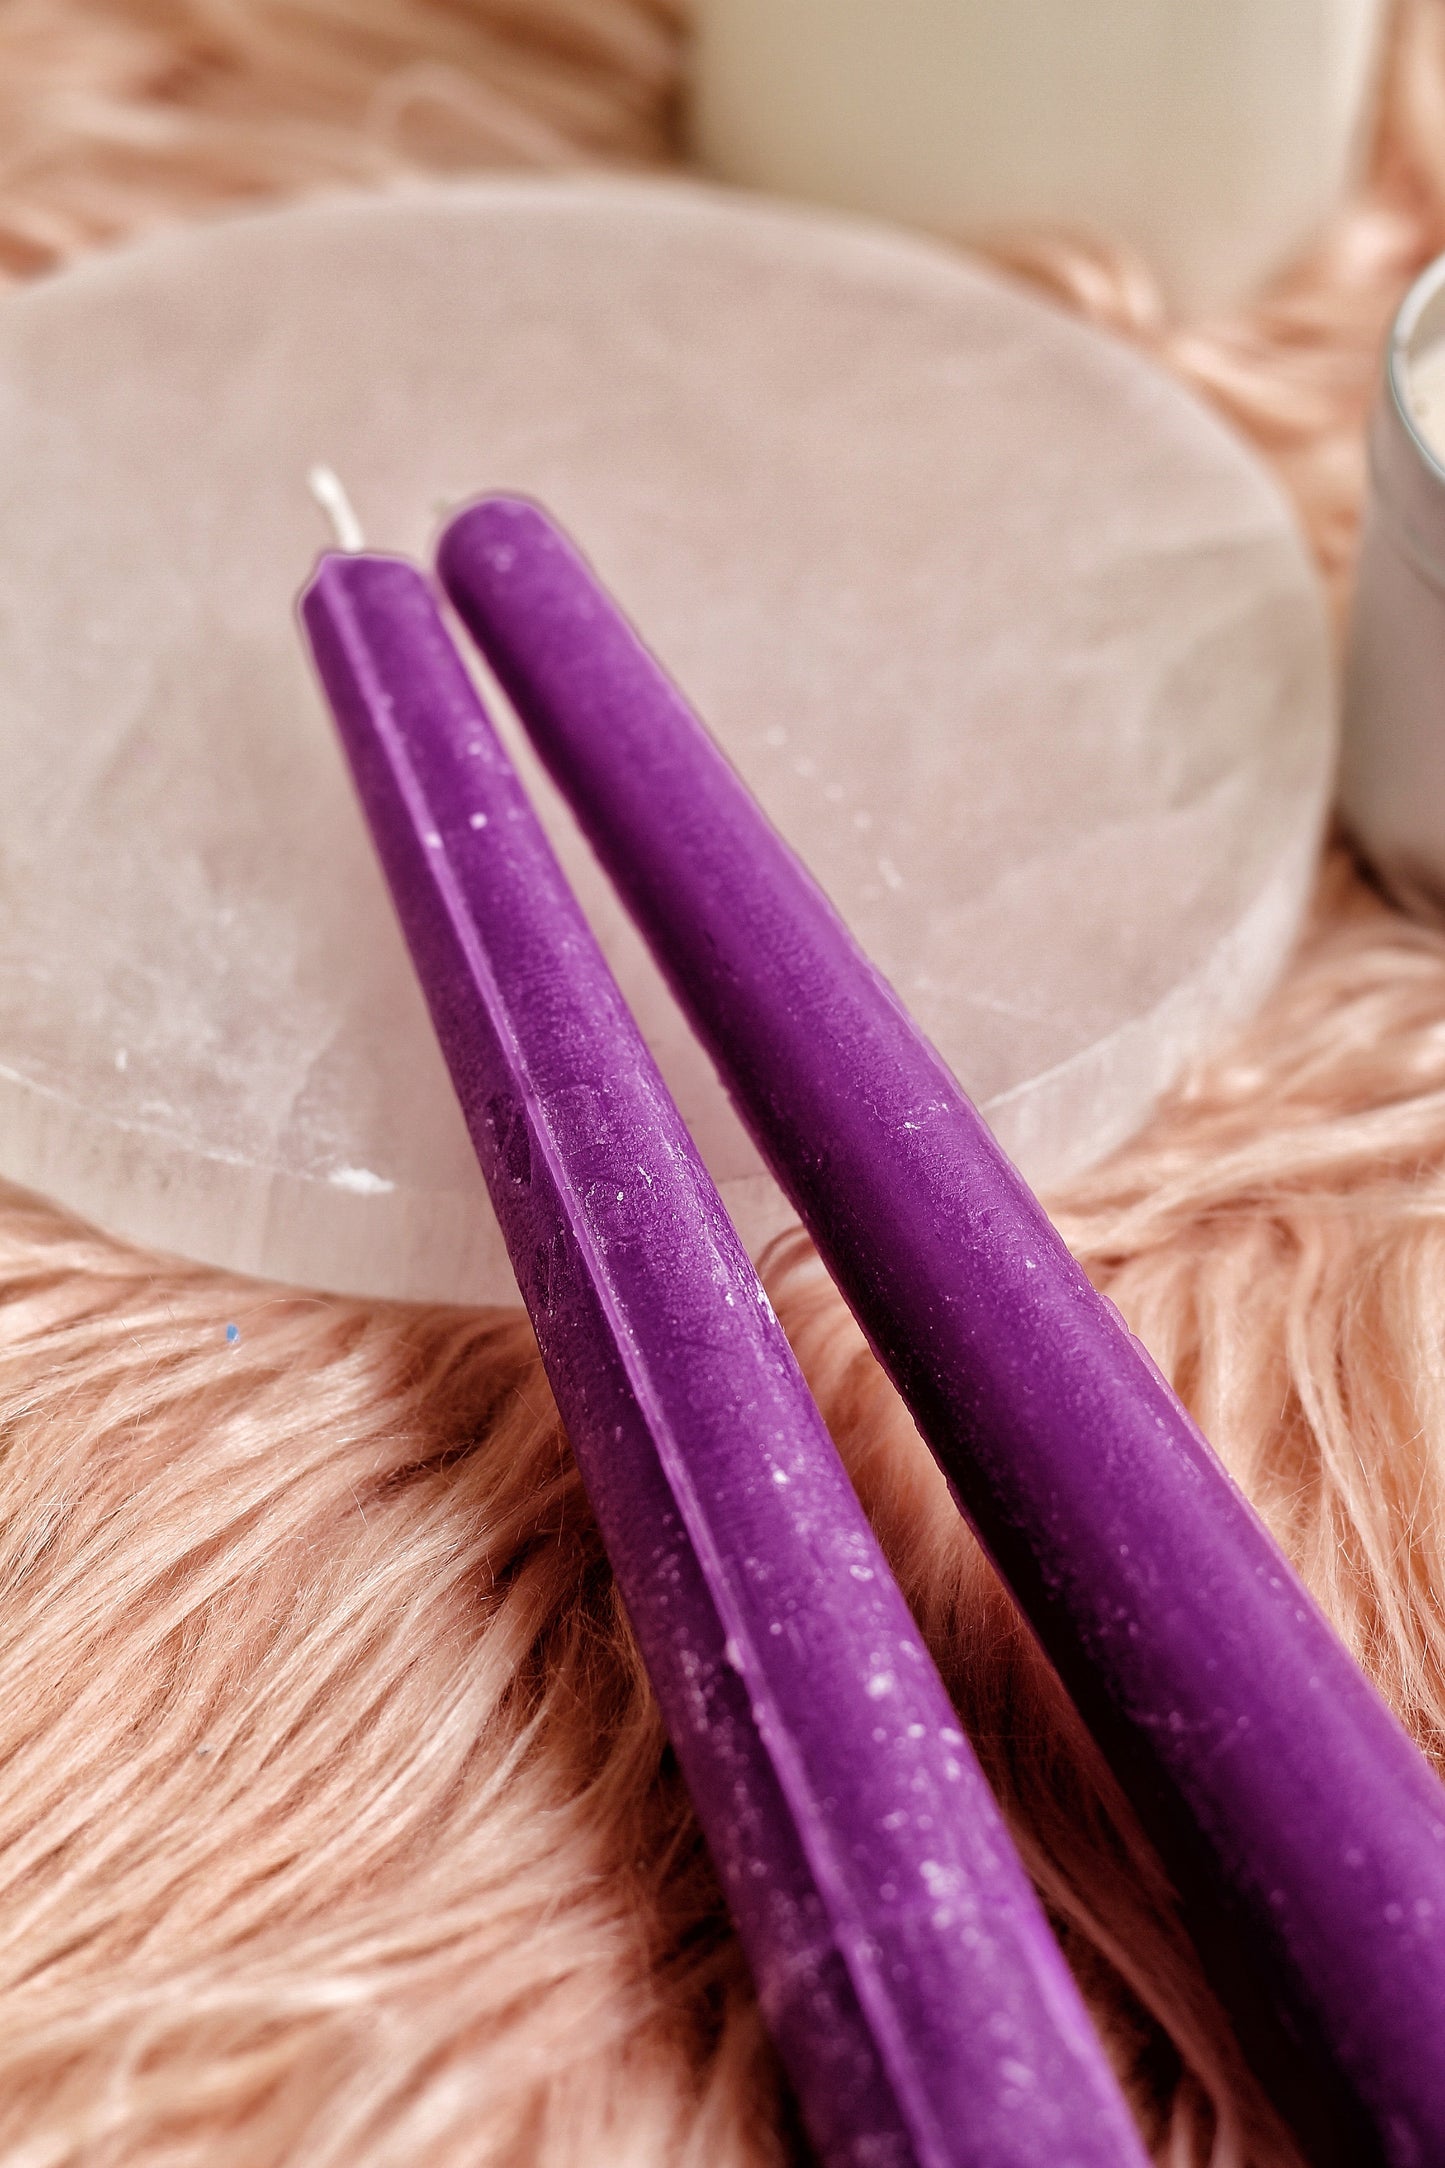 Purple Taper Candle - Set Of 5